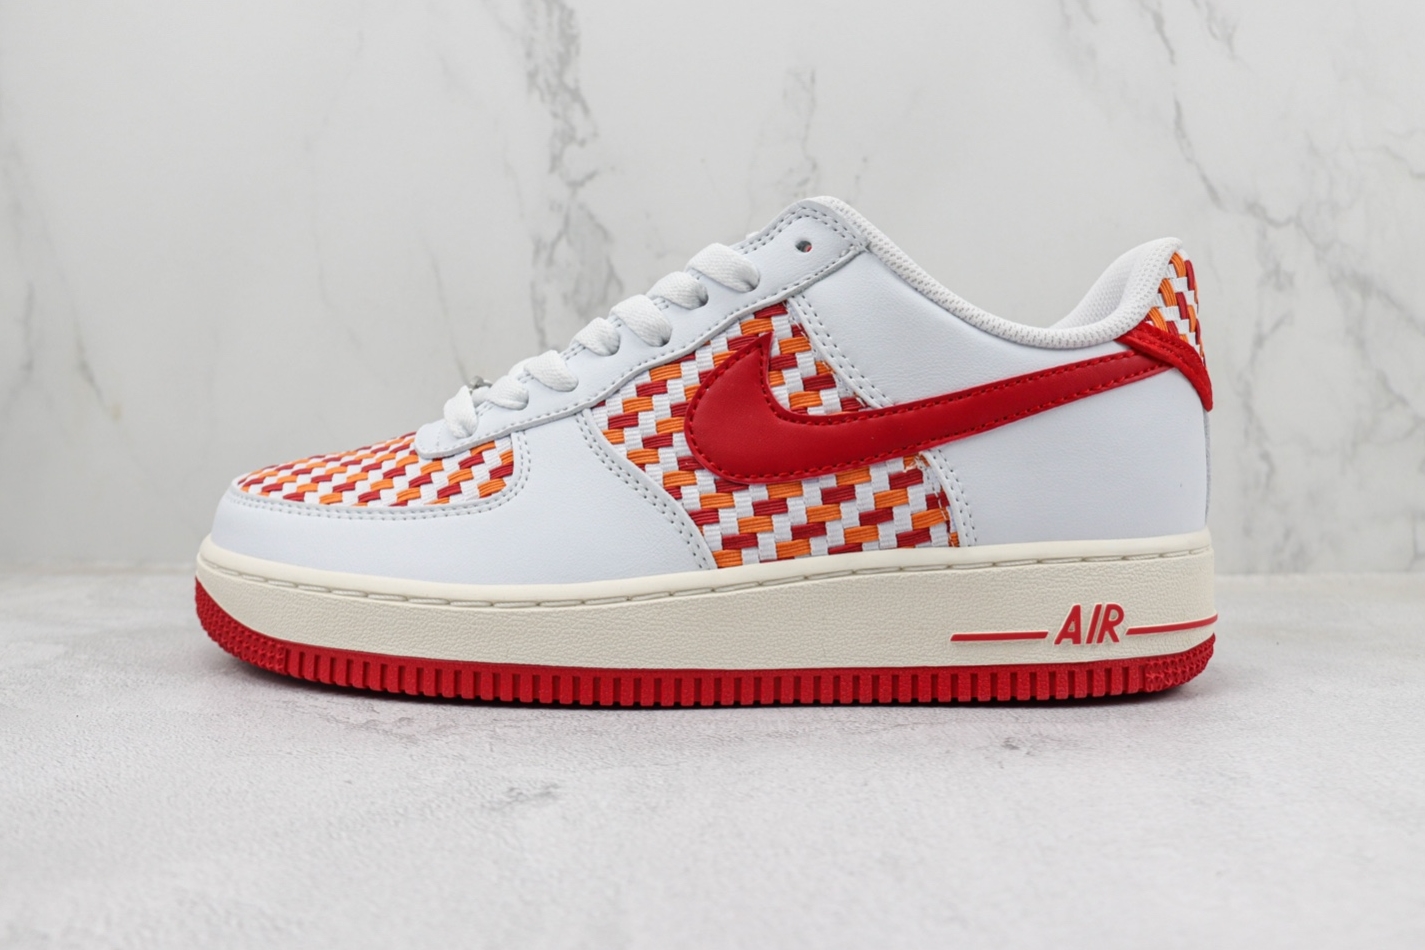 Nike Air Force 1 07 Low White Red Orange DM1060-161 - Stylish and Vibrant Men's Sneakers in Multiple Colors